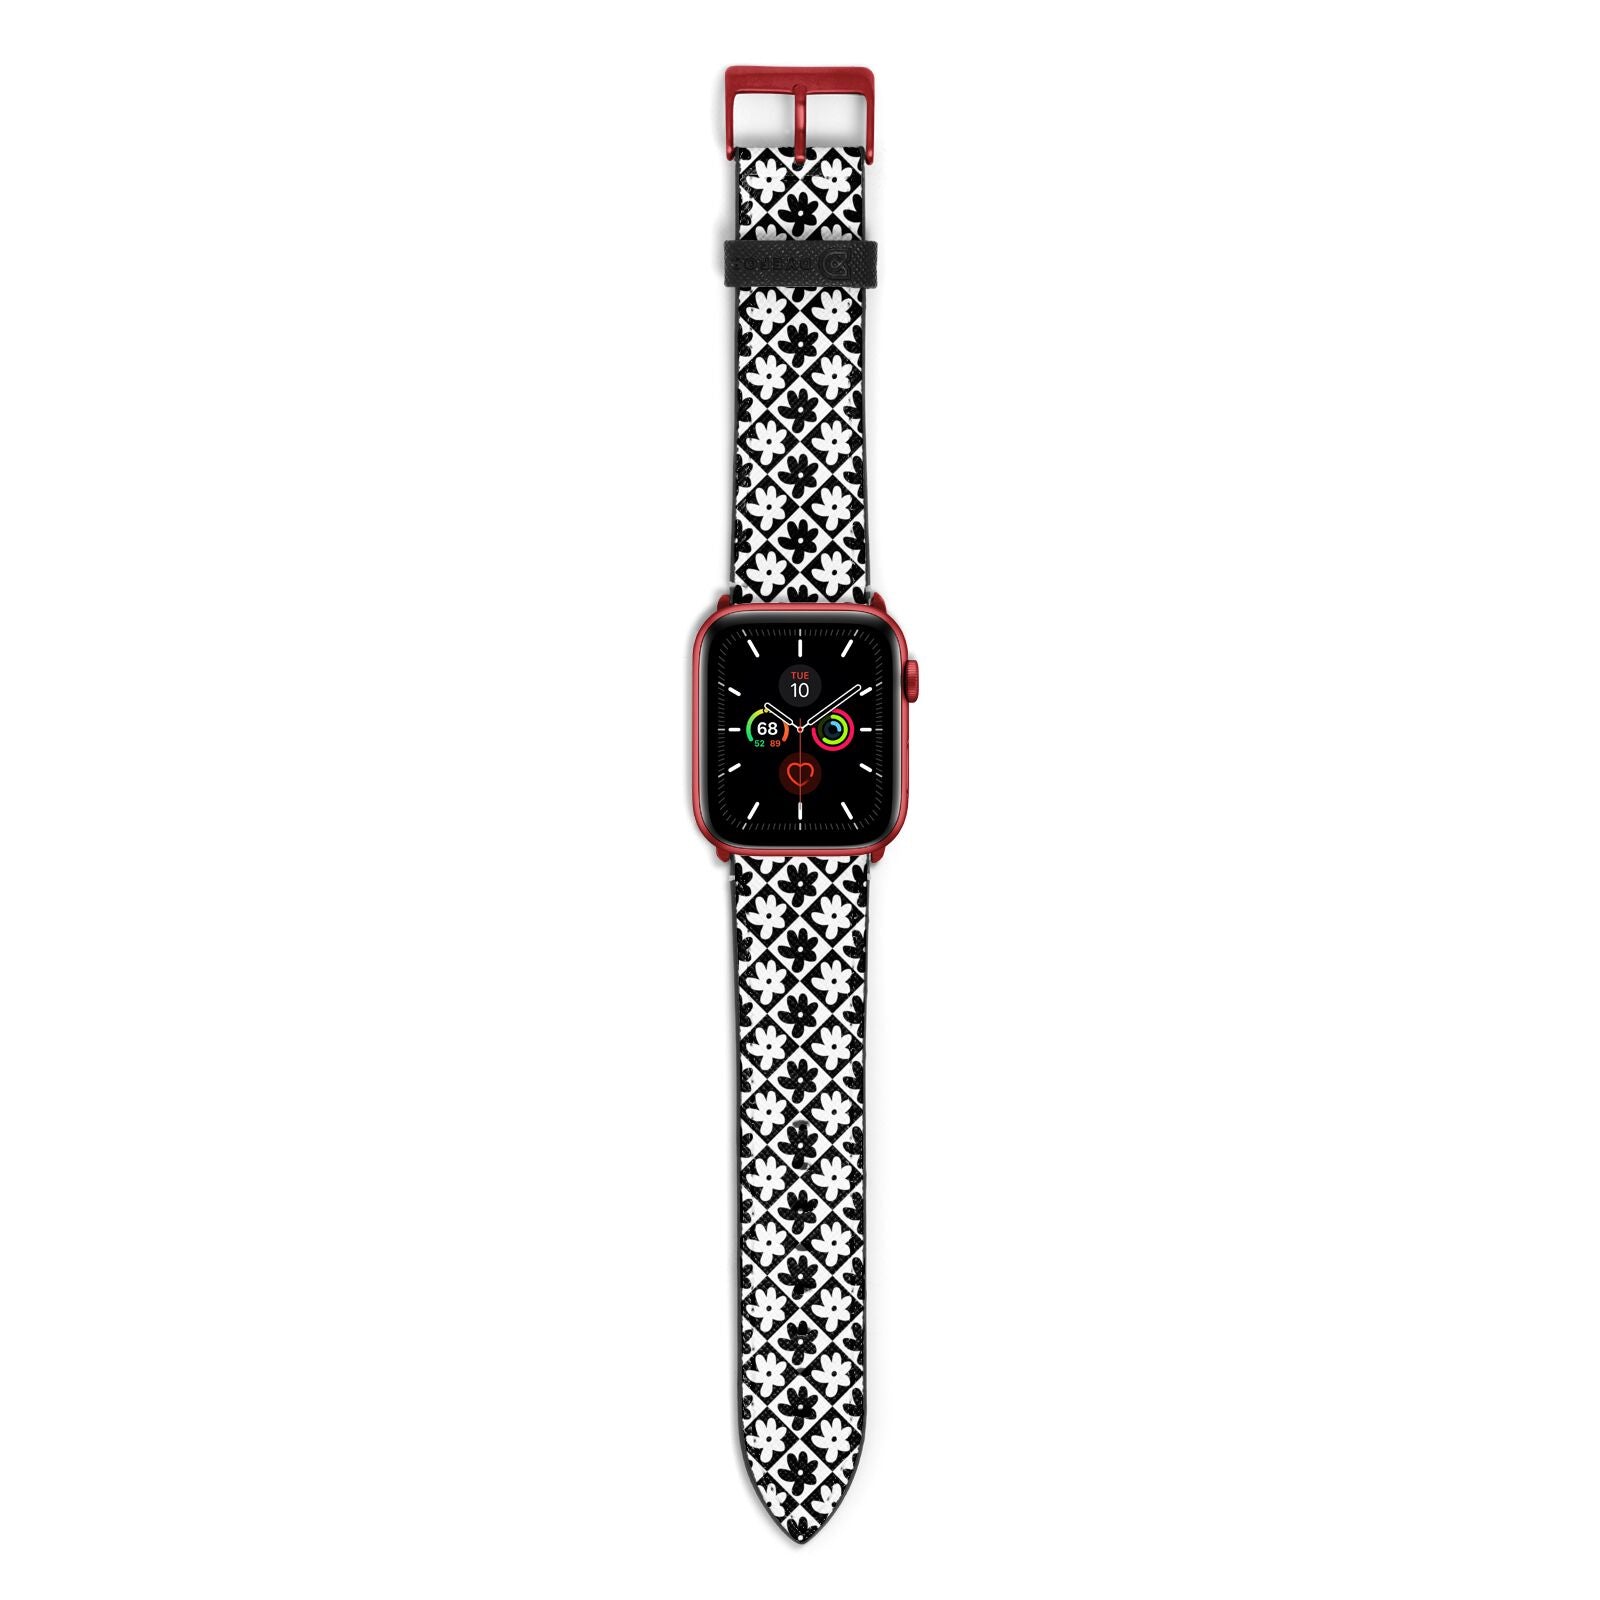 Check Flower Apple Watch Strap with Red Hardware